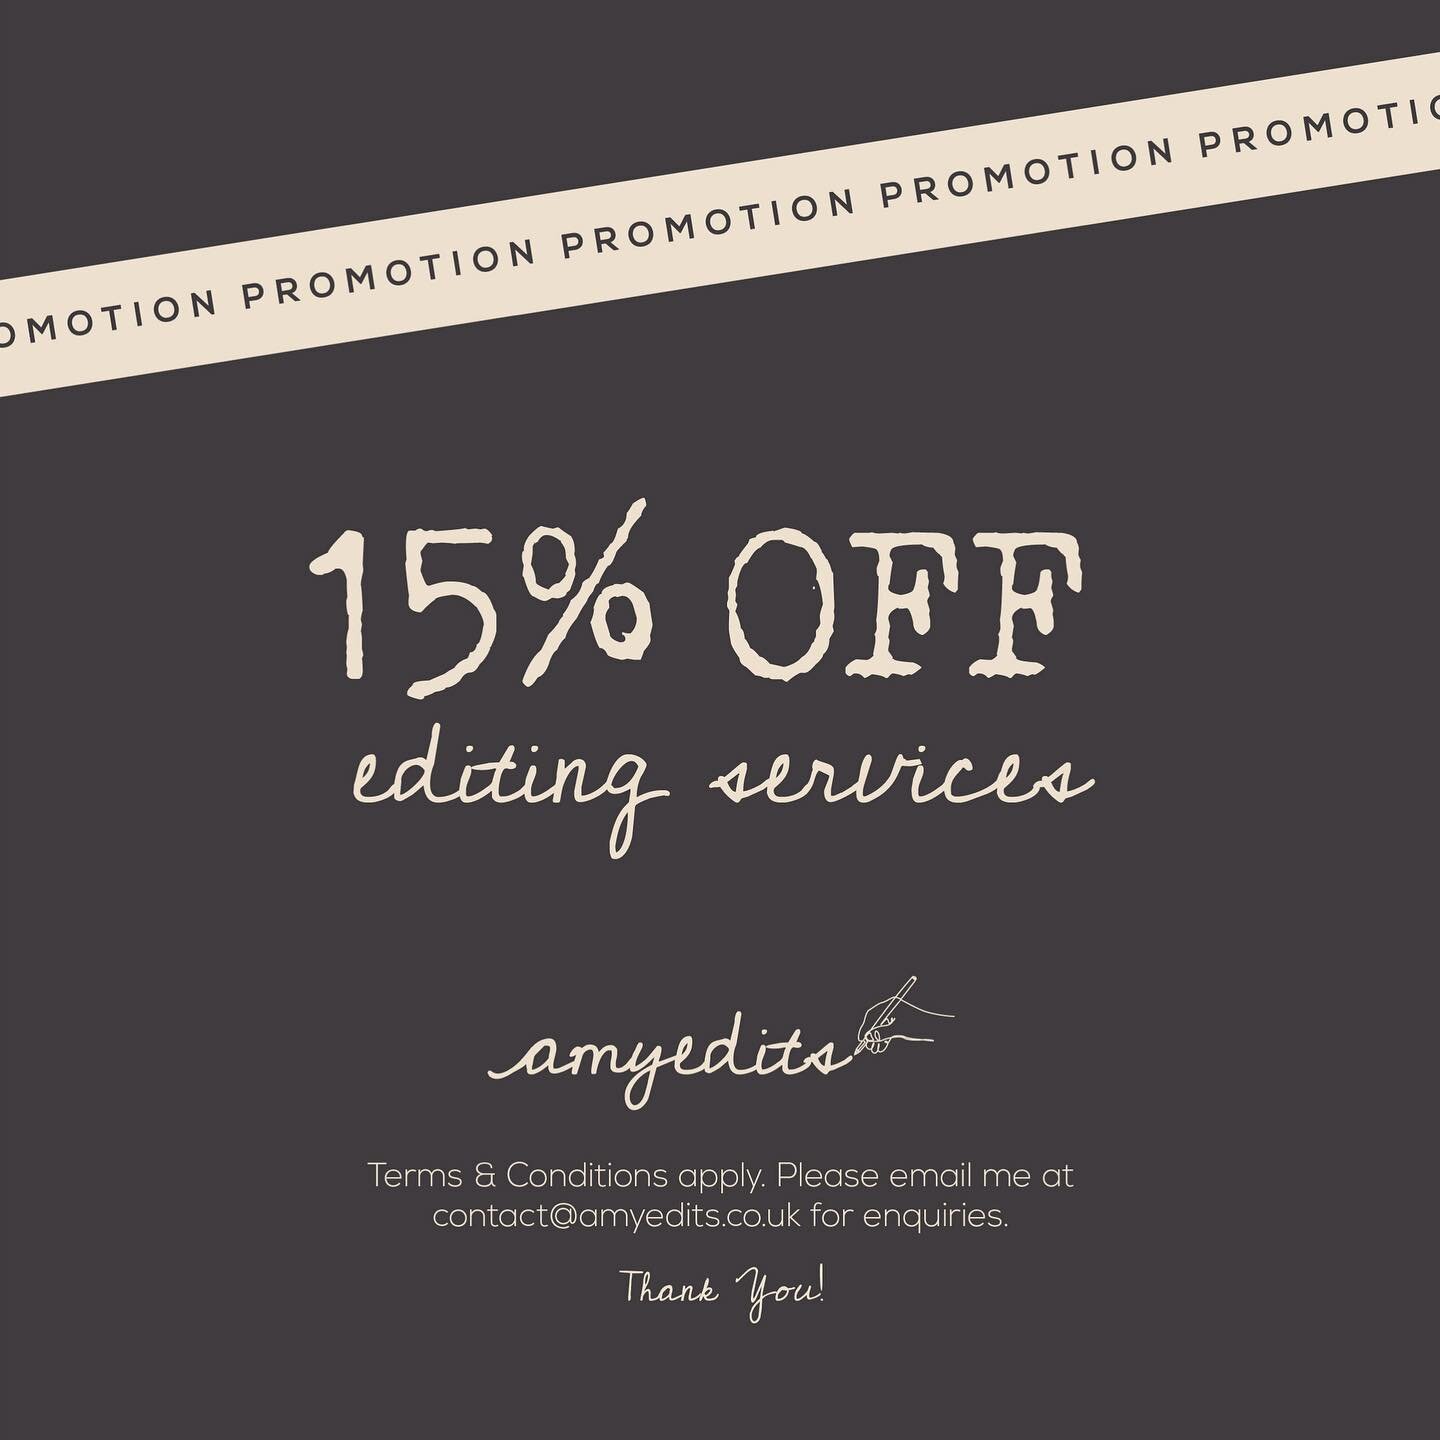 🌟𝐍𝐀𝐓𝐈𝐎𝐍𝐀𝐋 𝐍𝐎𝐕𝐄𝐋 𝗪𝐑𝐈𝐓𝐈𝐍𝐆 𝐌𝐎𝐍𝐓𝐇 𝐏𝐑𝐎𝐌𝐎𝐓𝐈𝐎𝐍: 15% off editing services when you book in this month.🌟⁣⁣
⁣
𝐎𝐟𝐟𝐞𝐫 🏷: To celebrate National Novel Writing Month, I am offering 15% off all bookings in November. The offe